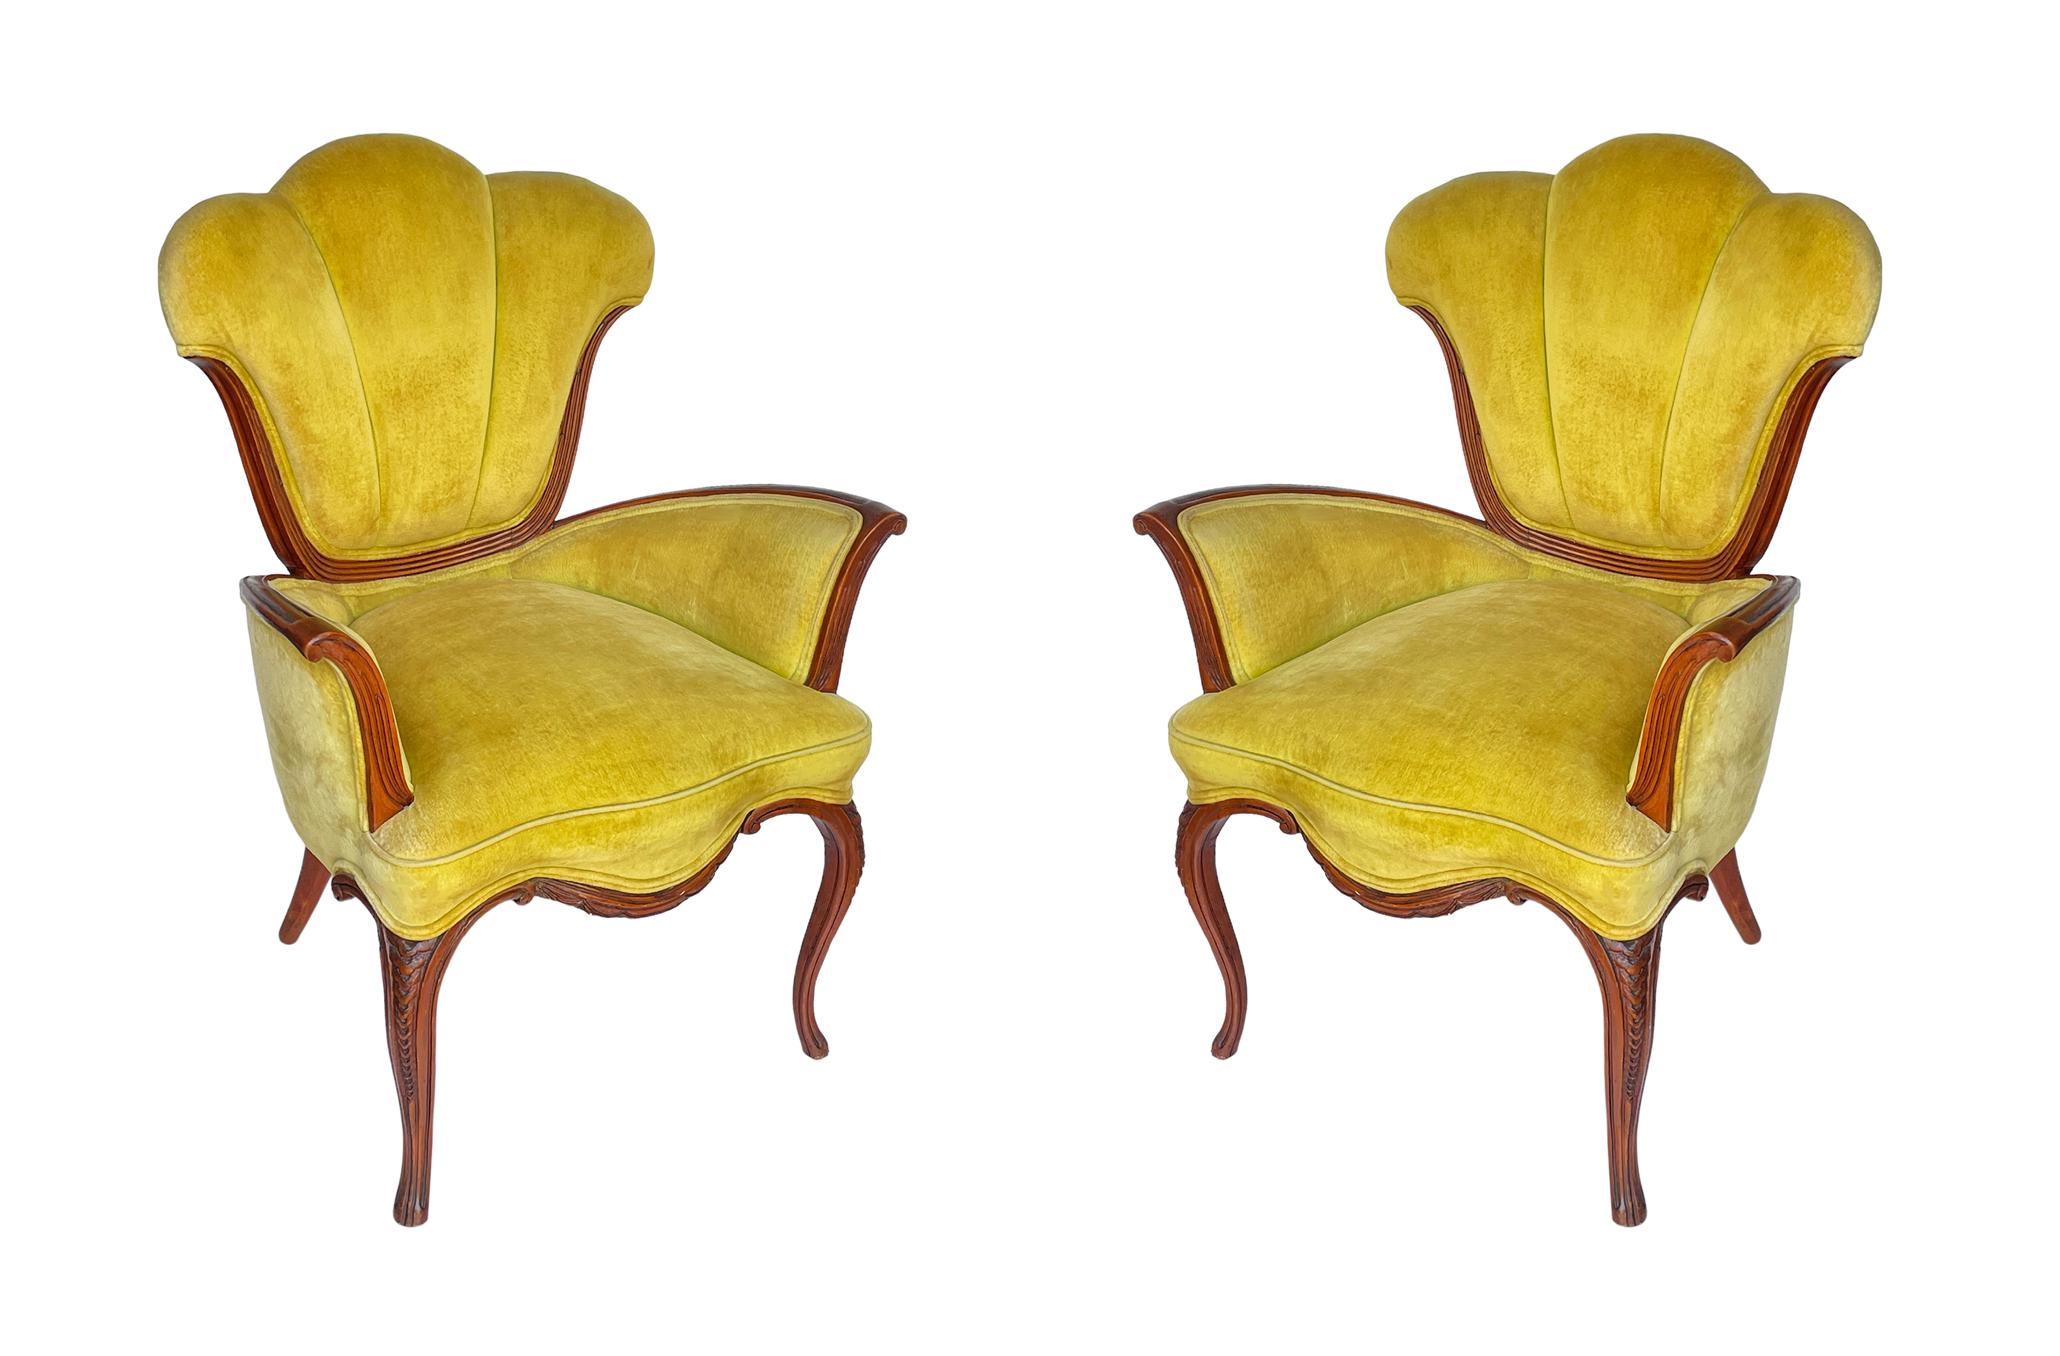 Mid-20th Century Vintage Pair of Hollywood Regency Art Nouveau Style French Lounge Armchairs  For Sale